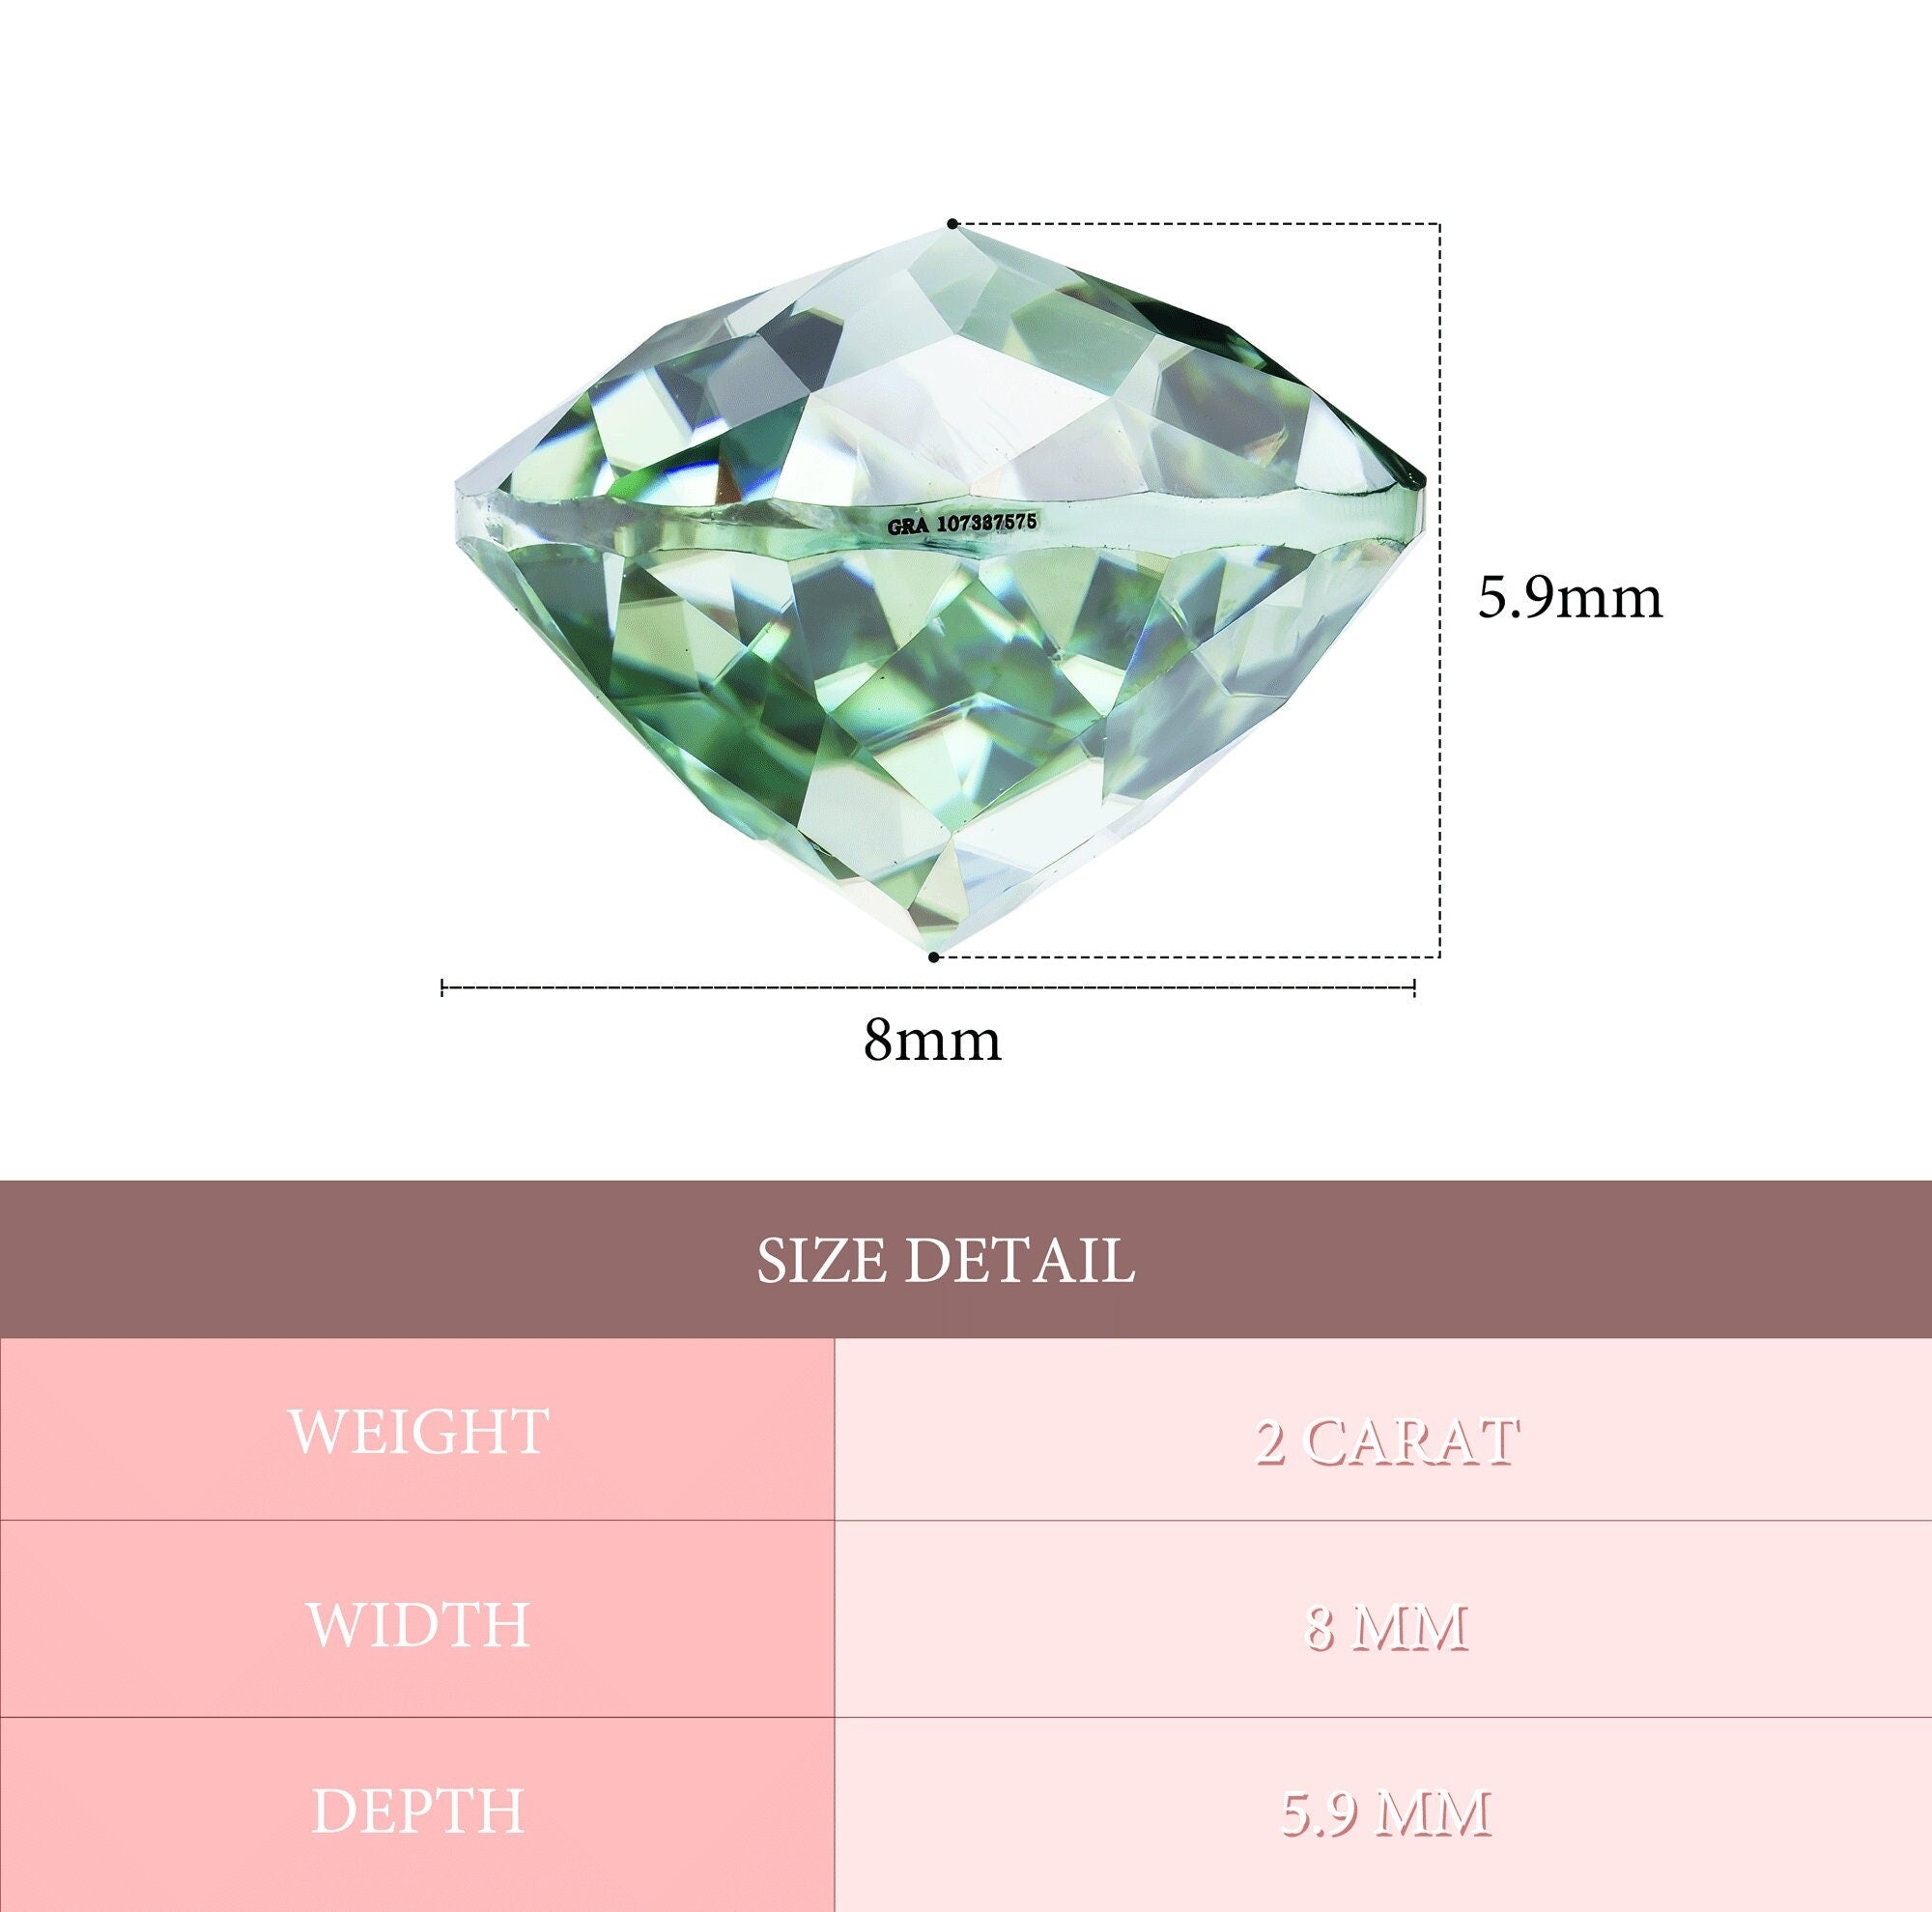 Moissanite rainbow green certified 2ct imperial round cut gemstone (8mm) - unique gra certified jewelry find